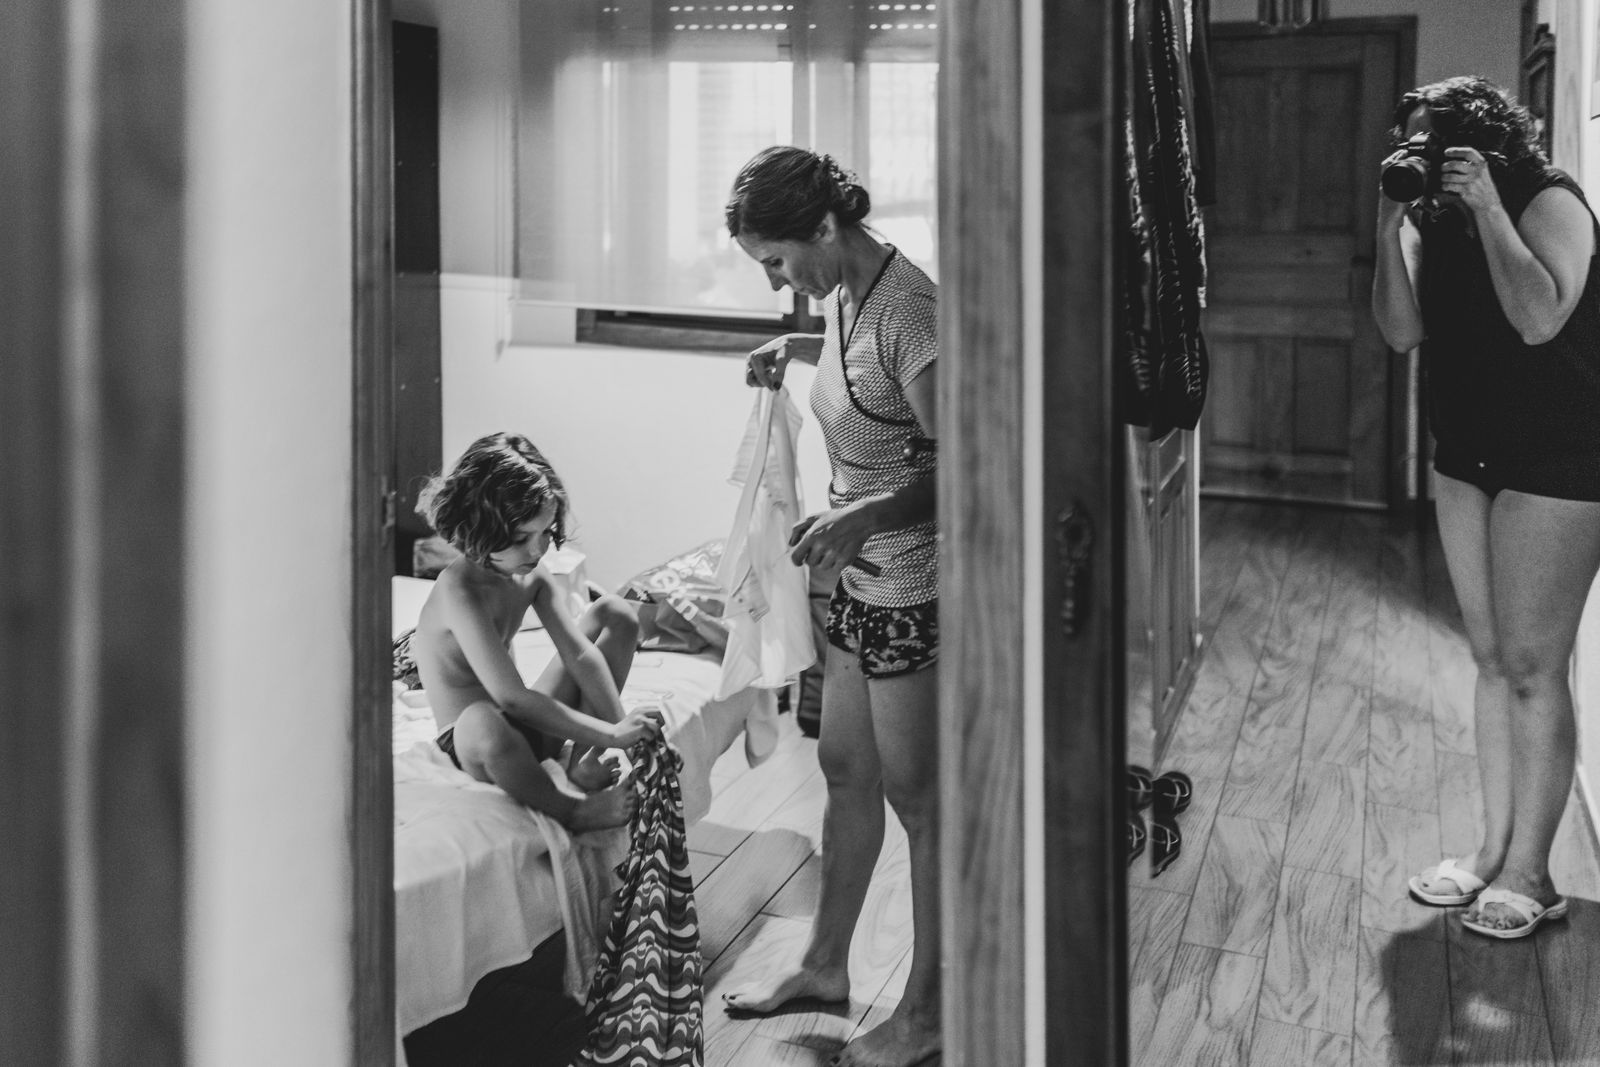 © Bego Amare - Time to get dressed, Manuela! important day for daddy and mummy